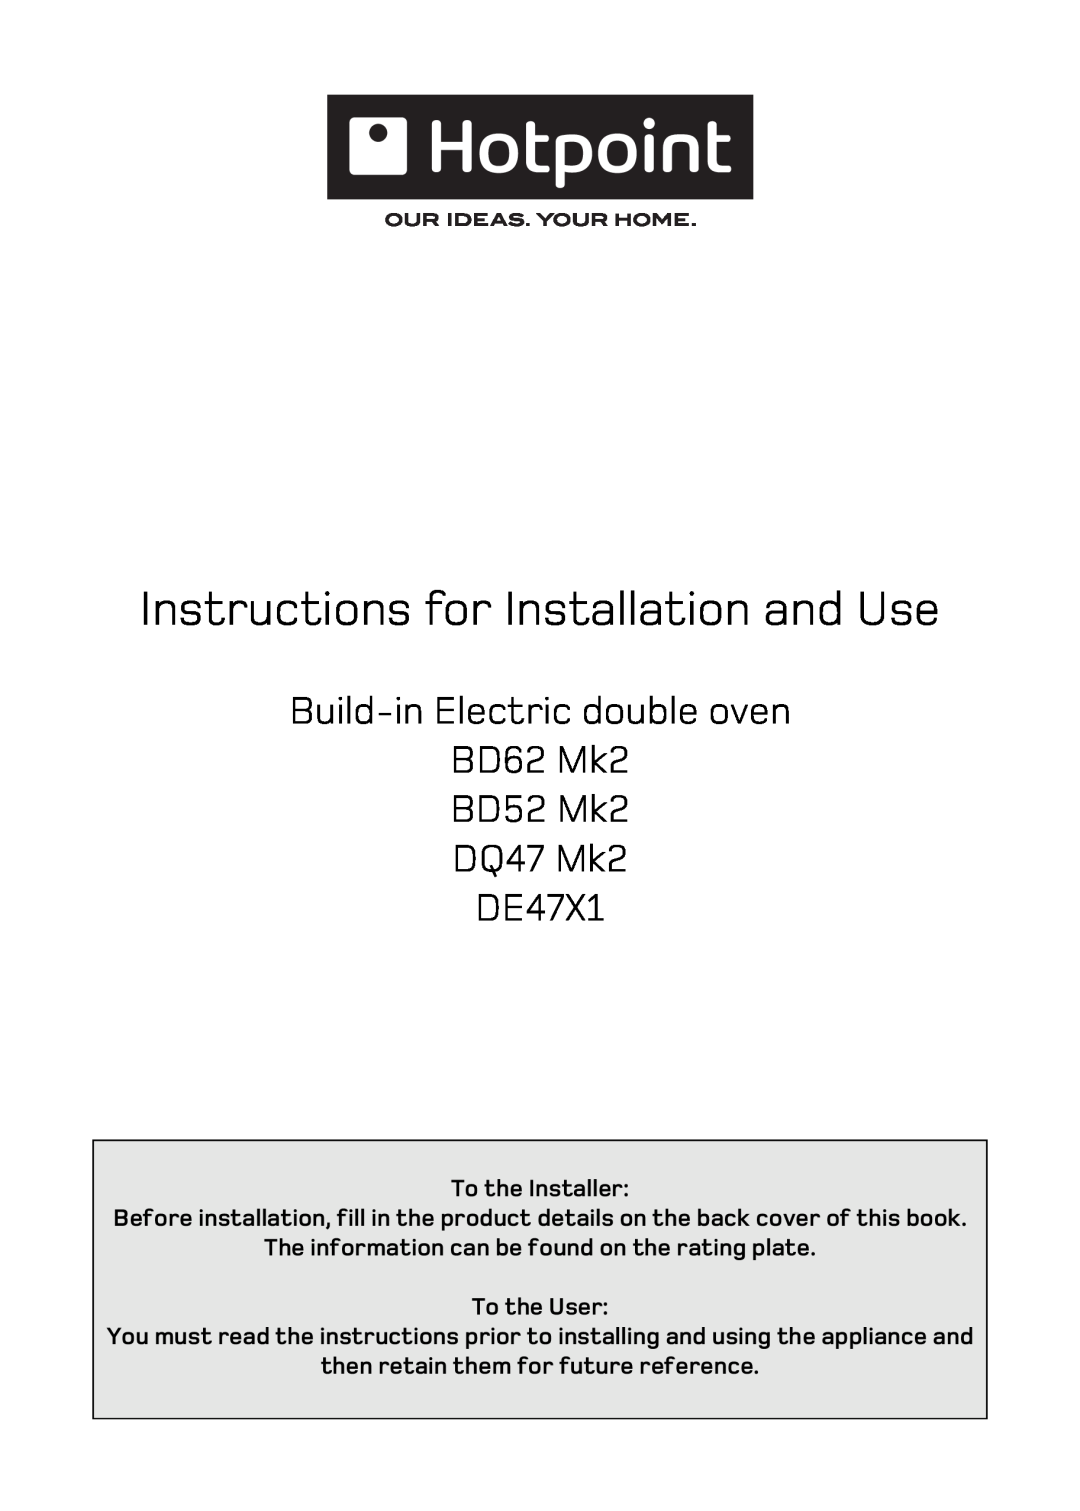 Hotpoint DQ47 Mk2 manual Instructions for Installation and Use, To the Installer, then retain them for future reference 